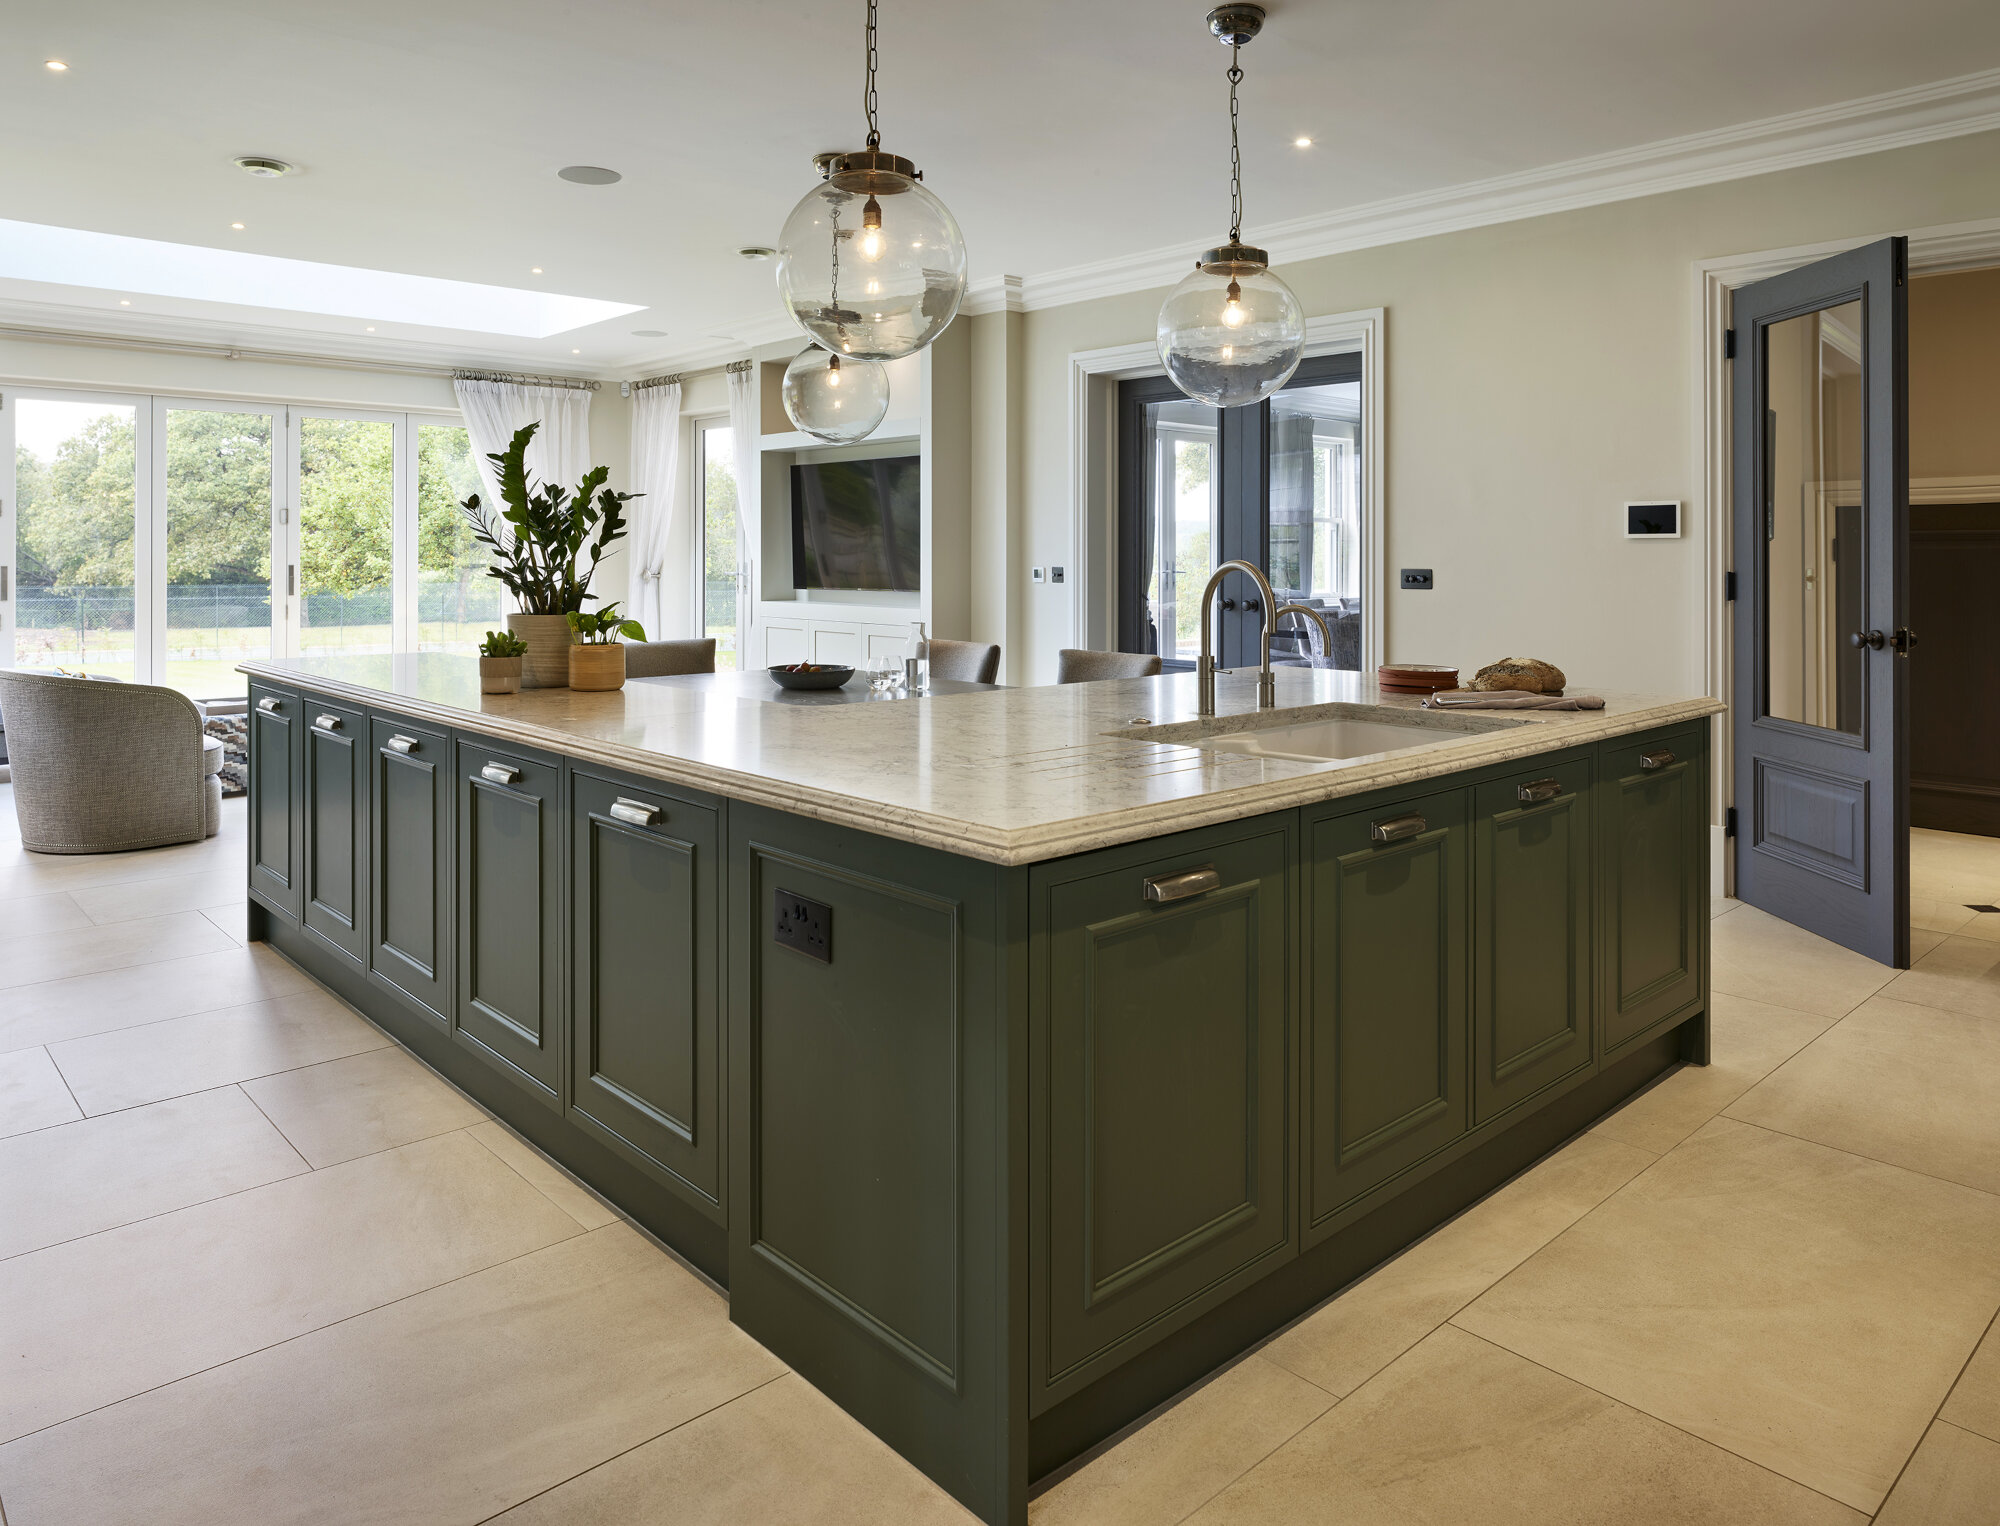 High End traditional Kitchens In Loughborough